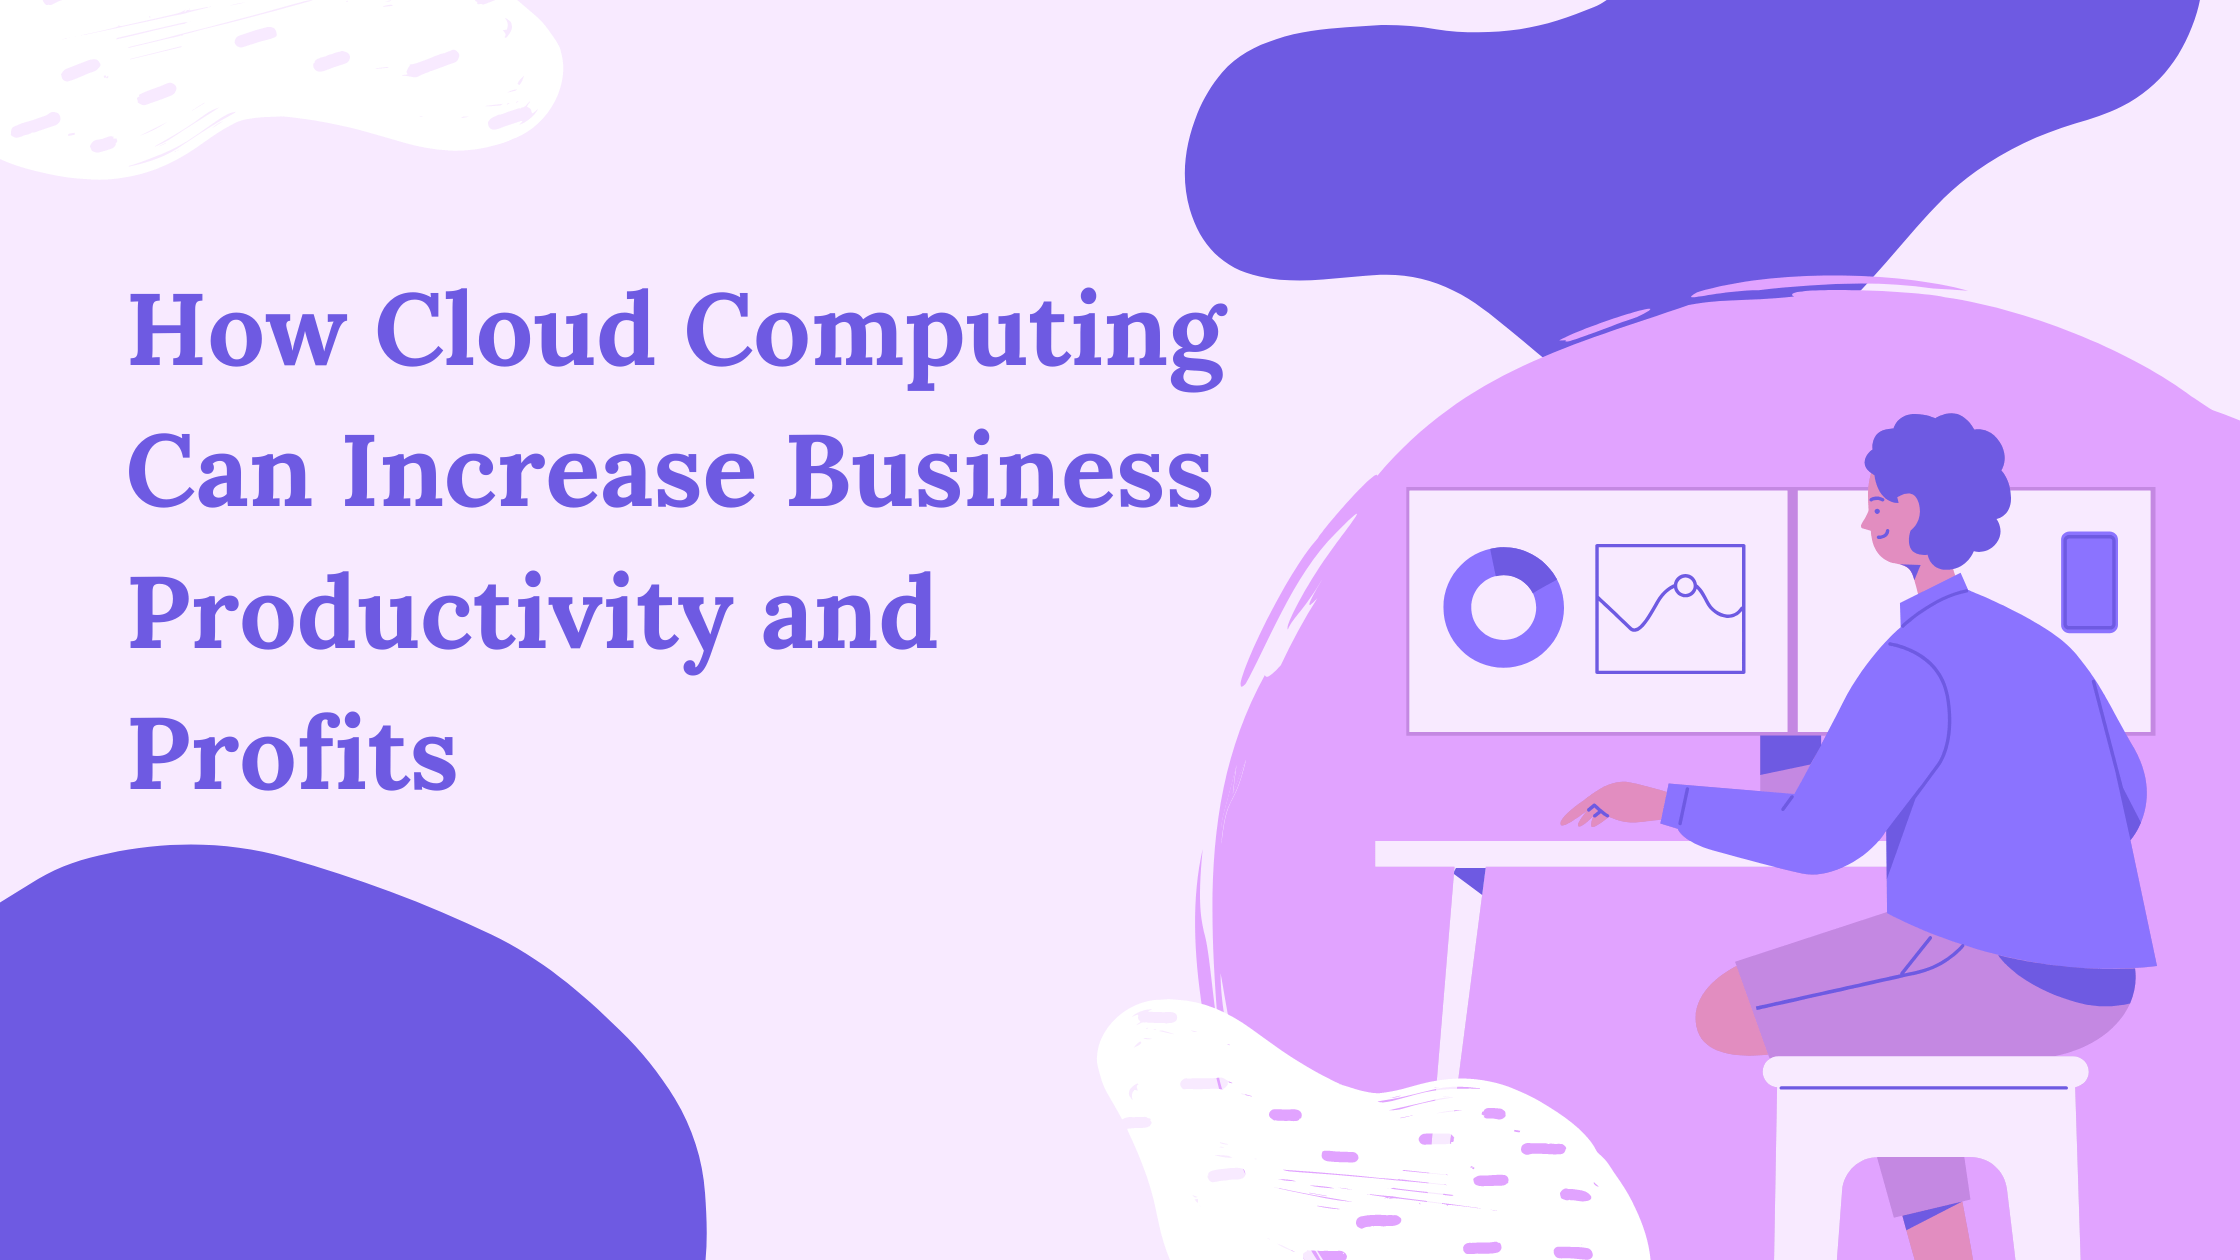 How Cloud Computing Can Increase Business Productivity and Profits